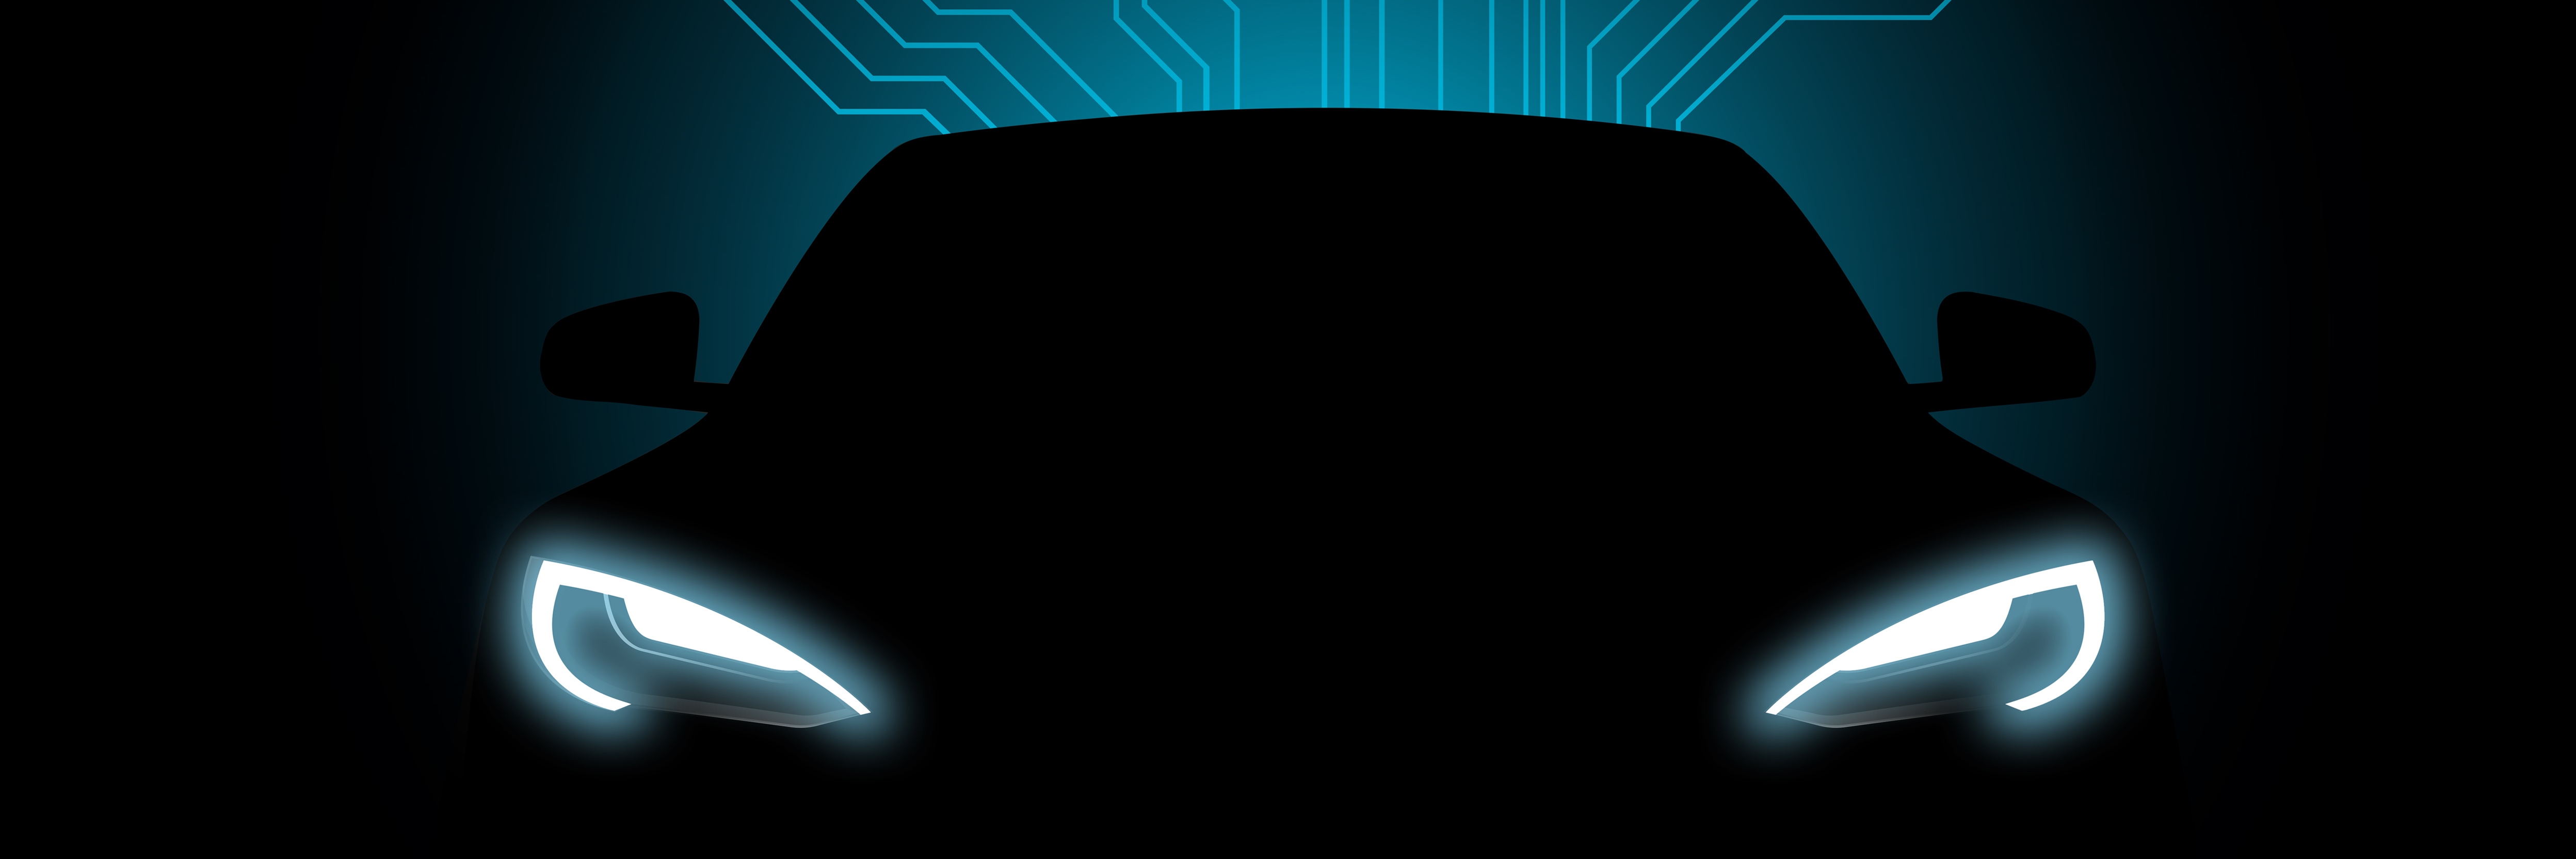 Digital illustration of modern car with cyber data lines graphic